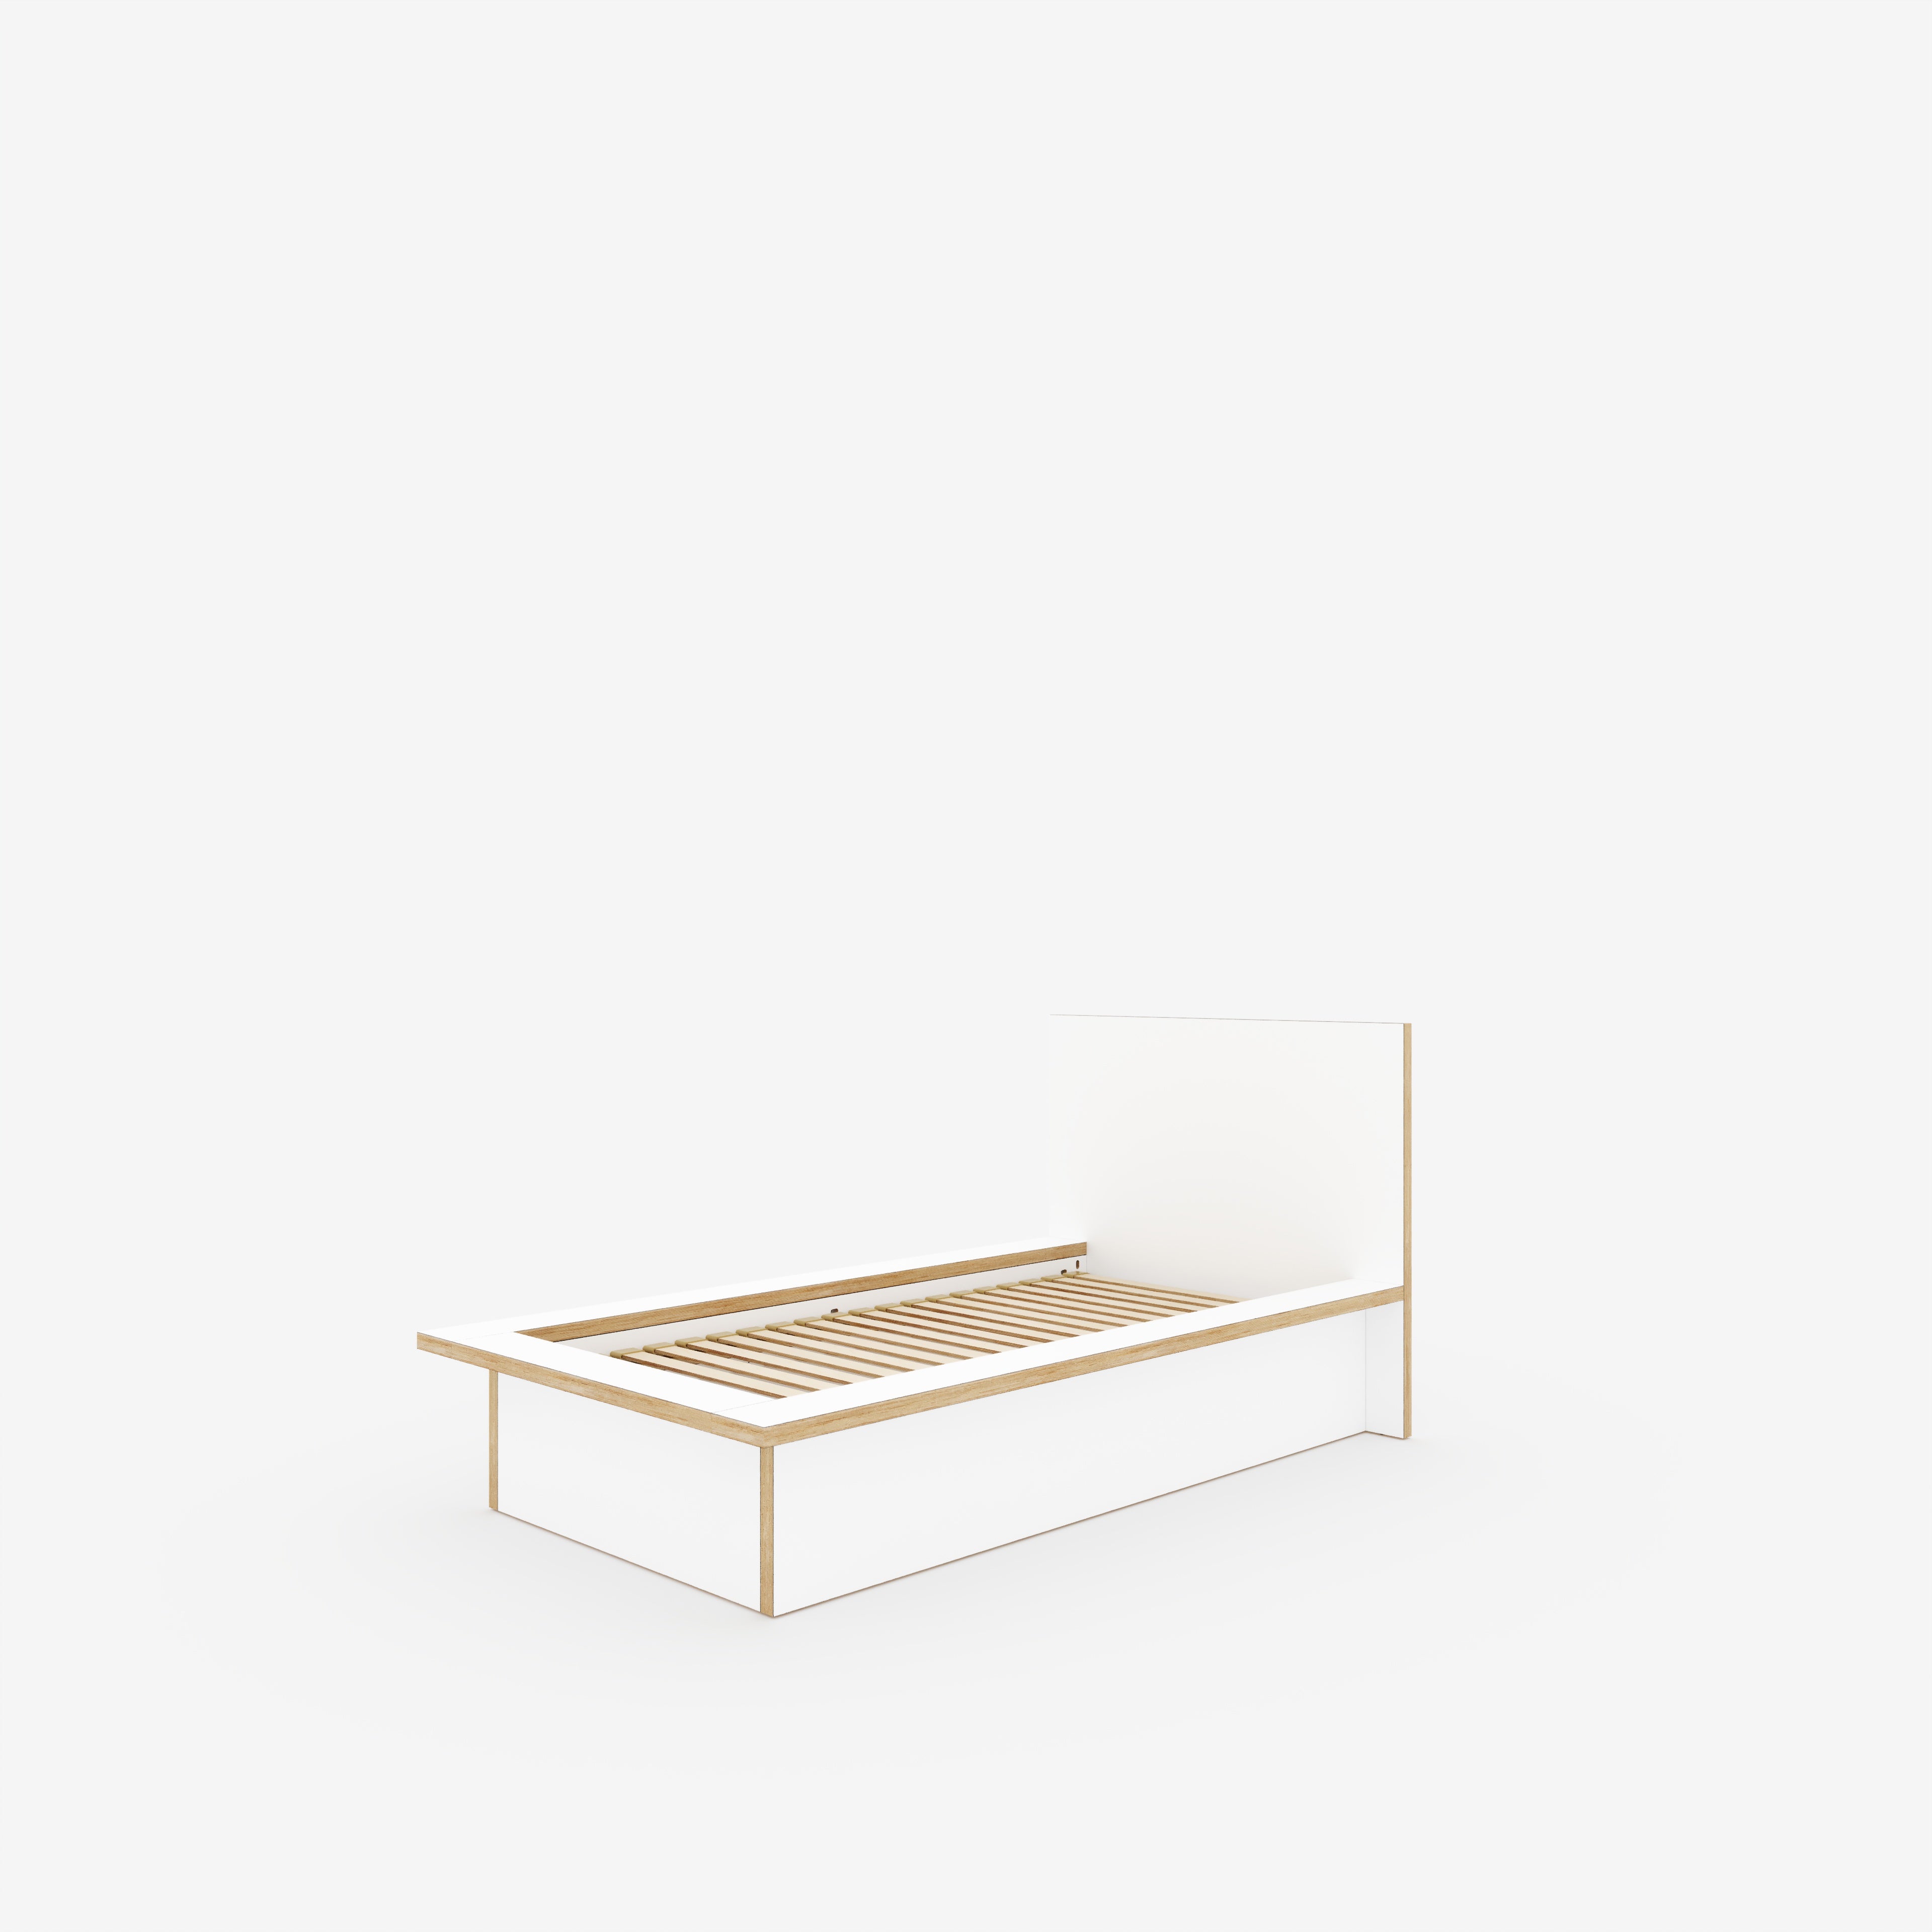 Plywood Platform Bed - Plywood Formica White - Standard Single 900(w) x 1900(d) - High